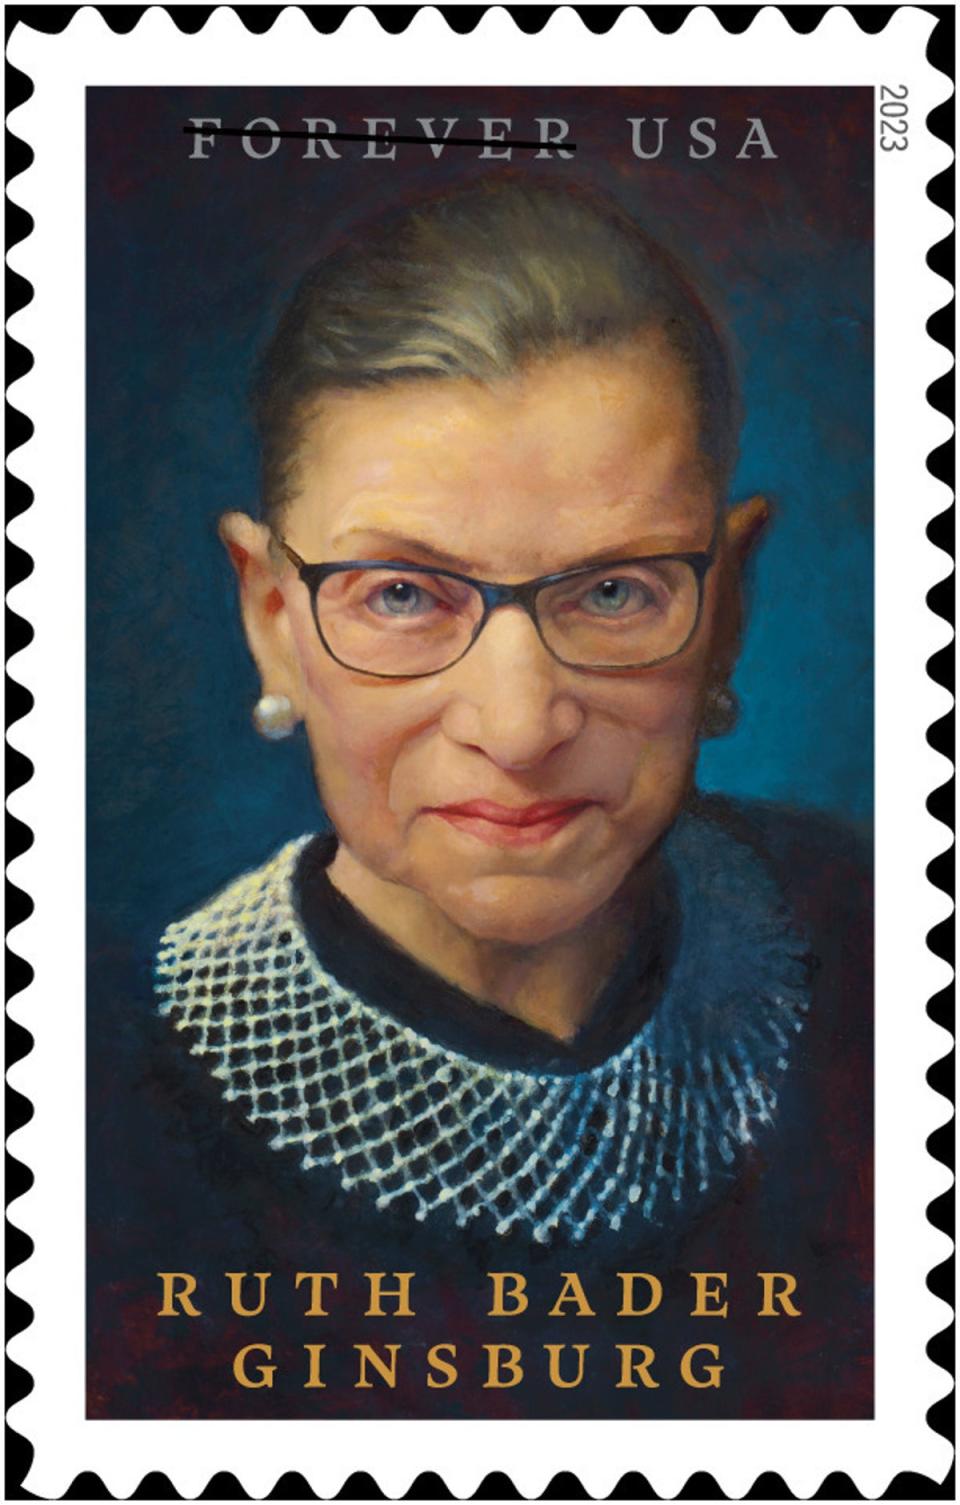 Ruth Bader Ginsburg to be commemorated on a stamp in 2023 (USPS)